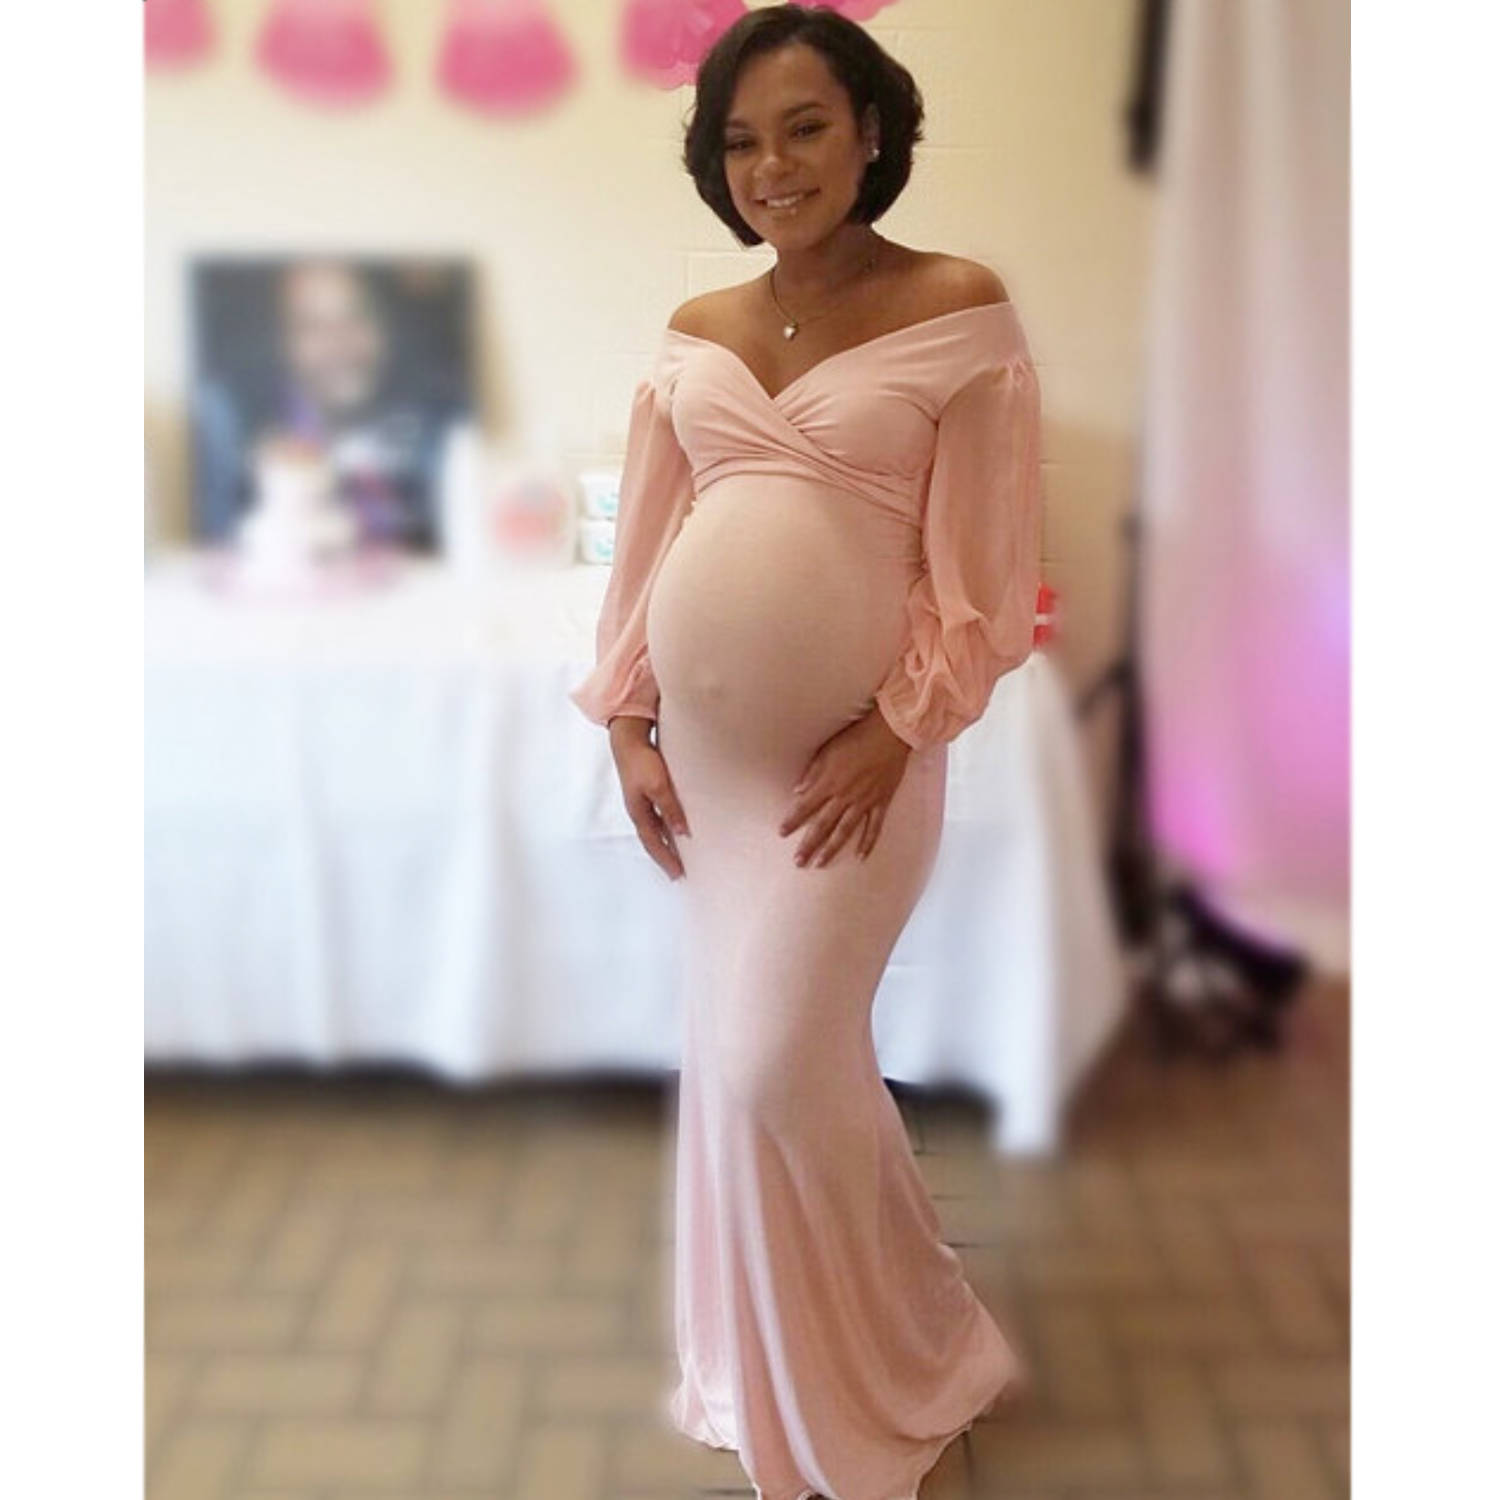 Full Size of Baby Shower:alluring Baby Shower Dresses A Pea In The Pod Maternity Clothes Maternity Dresses Formal 2 Searches Left. What Should I Wear To My Baby Shower